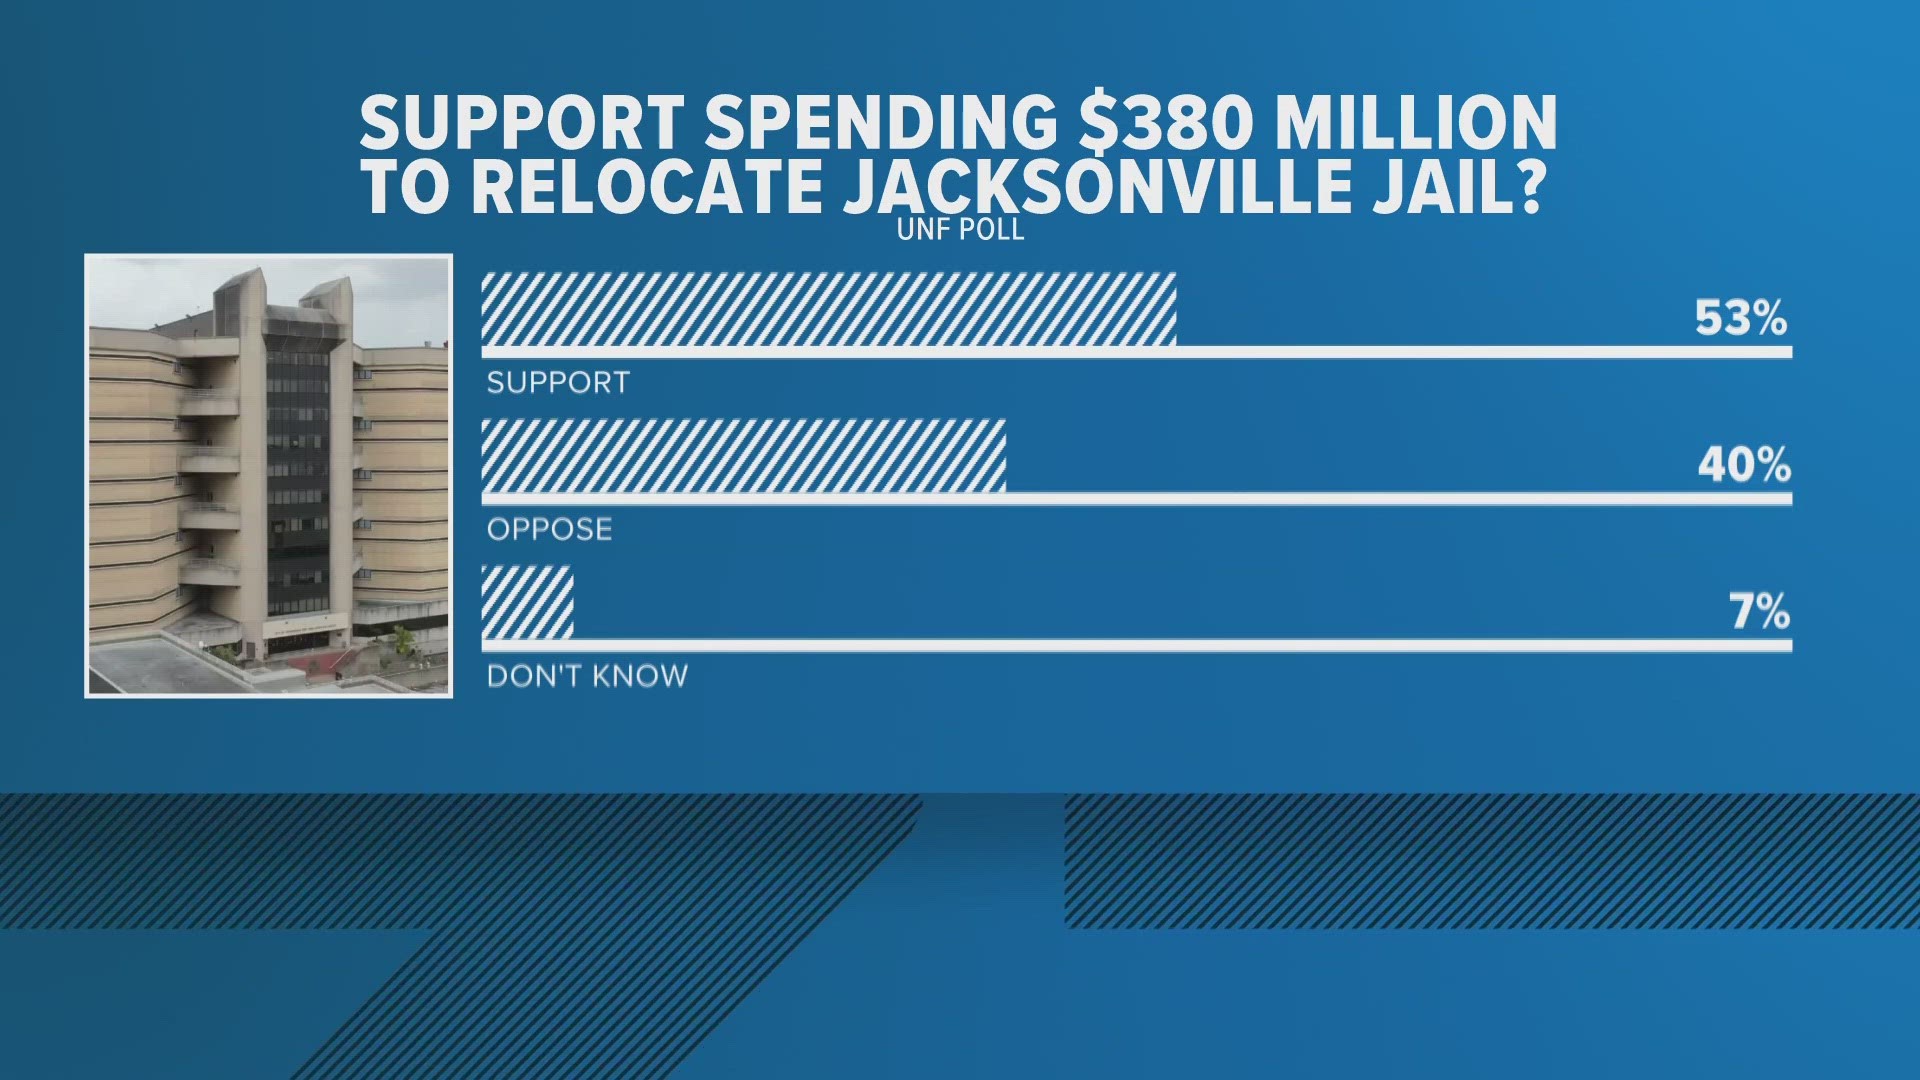 Data from the latest "Jax Speaks" Poll from the University of North Florida shows 53% of voters are in favor of moving the jail while 40% oppose.